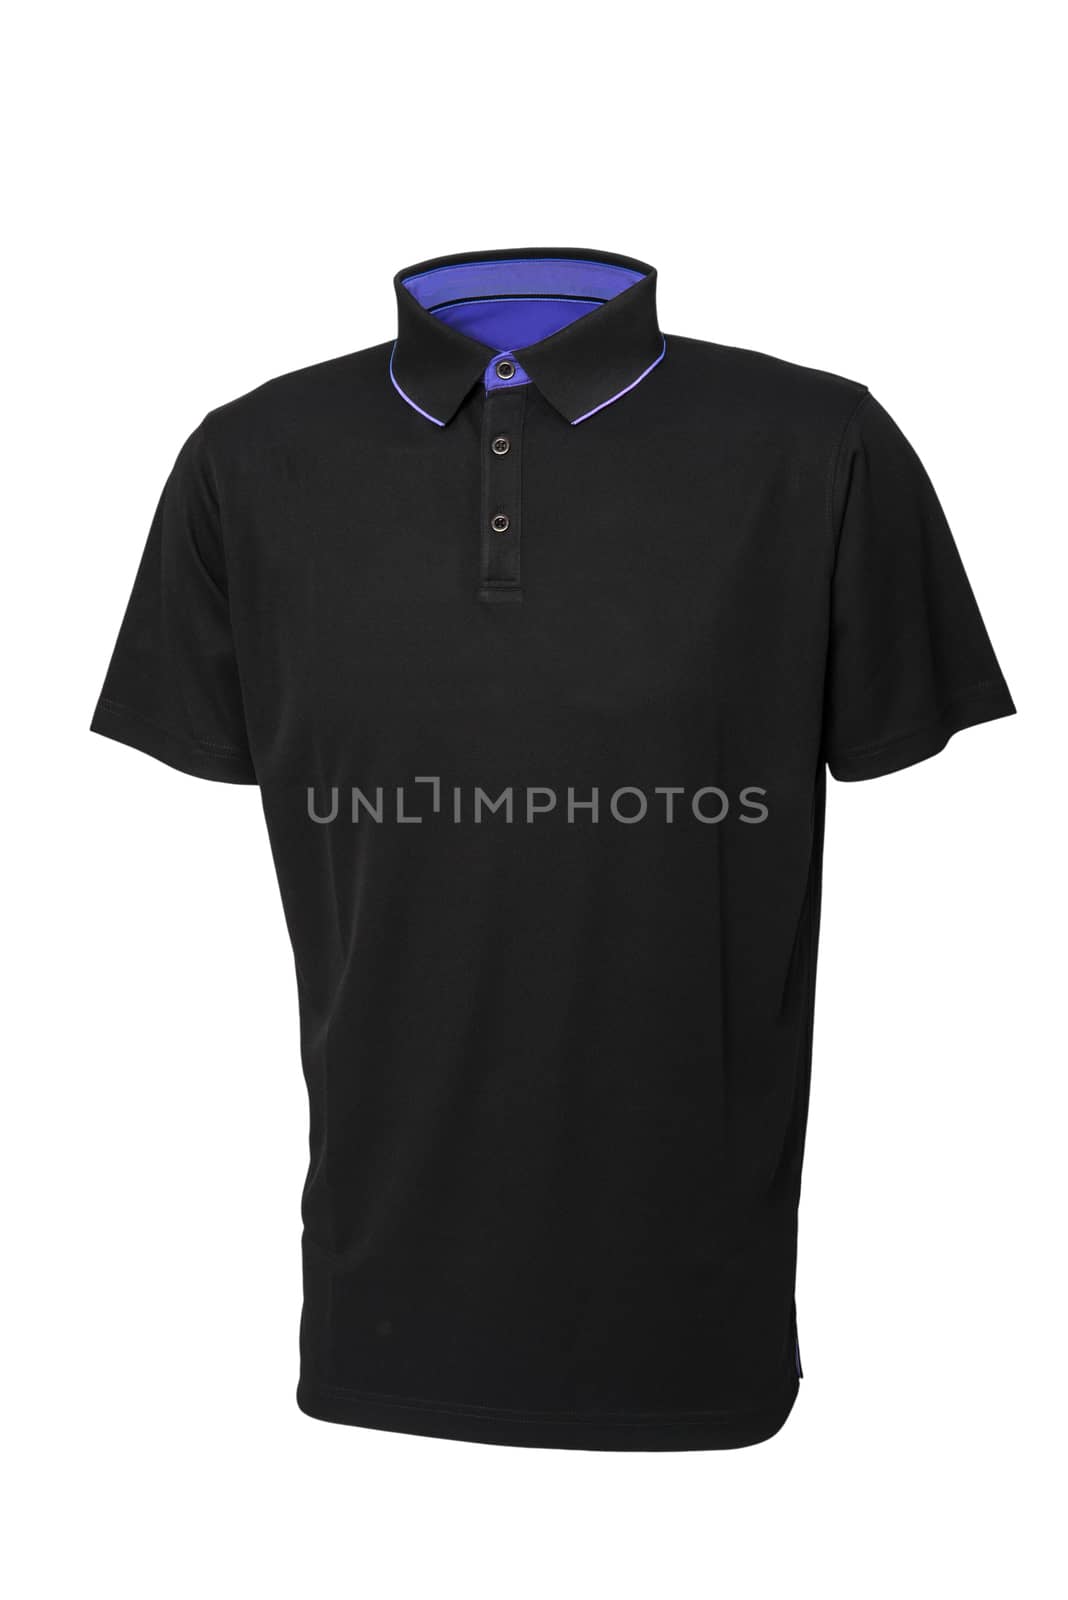 Golf black  tee shirt for man or woman with inside blue collar isolated on white background